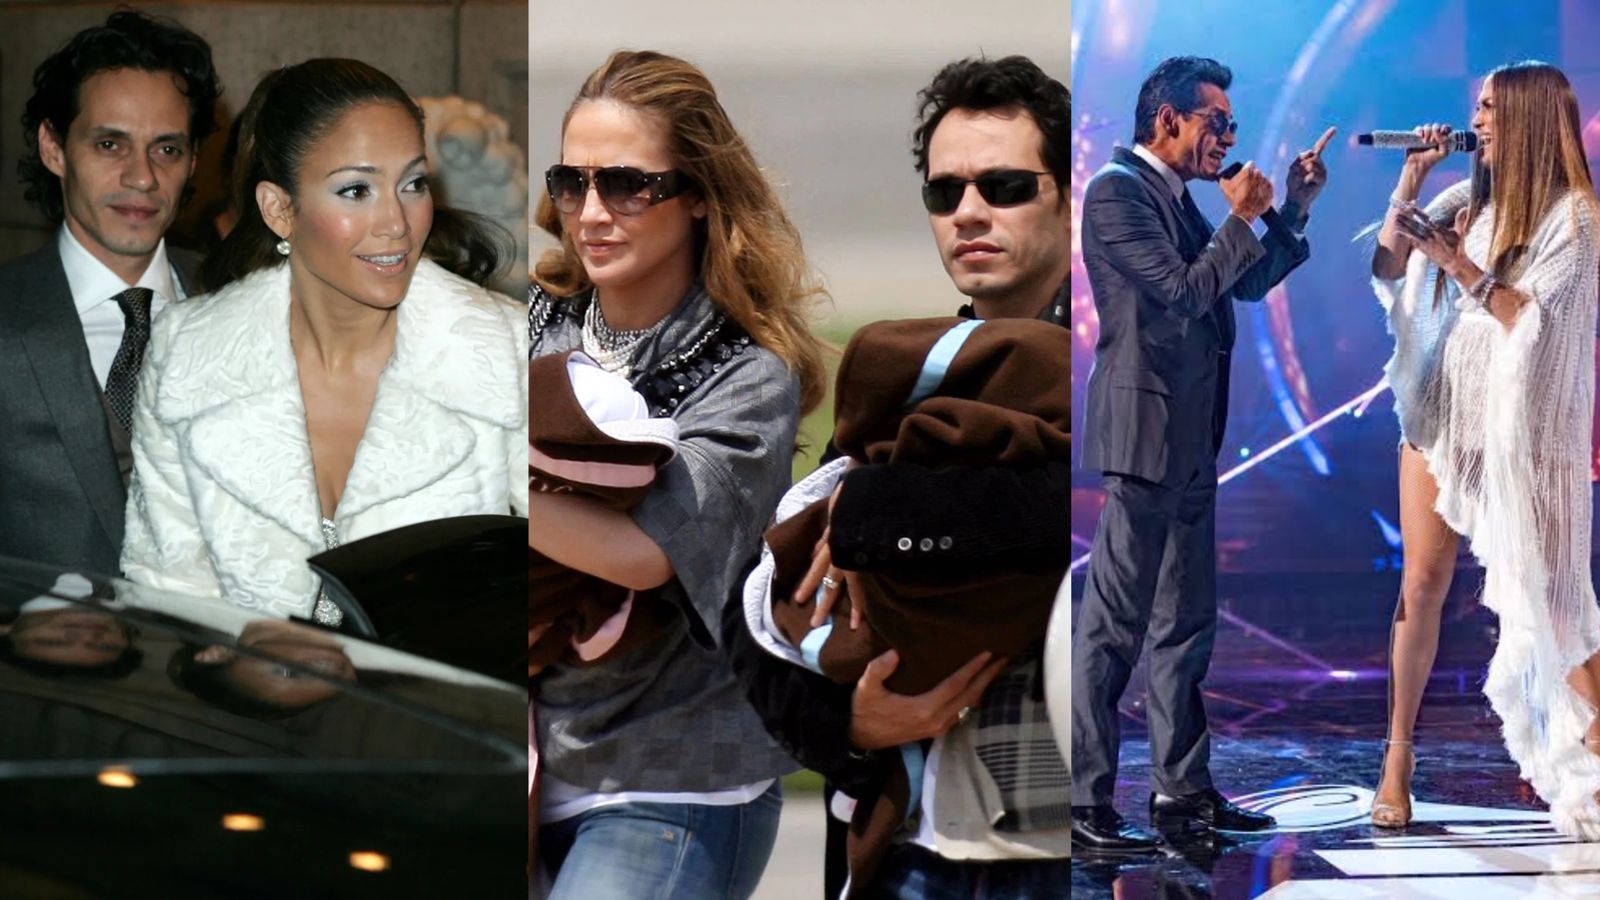 Rumors of infidelity, manipulation and anxiety were among the reasons why JLo and Marc Anthony ended their relationship (Photos: Intagram/@jlo_thonyfans/Twitter/@Lasectrellas-holly)